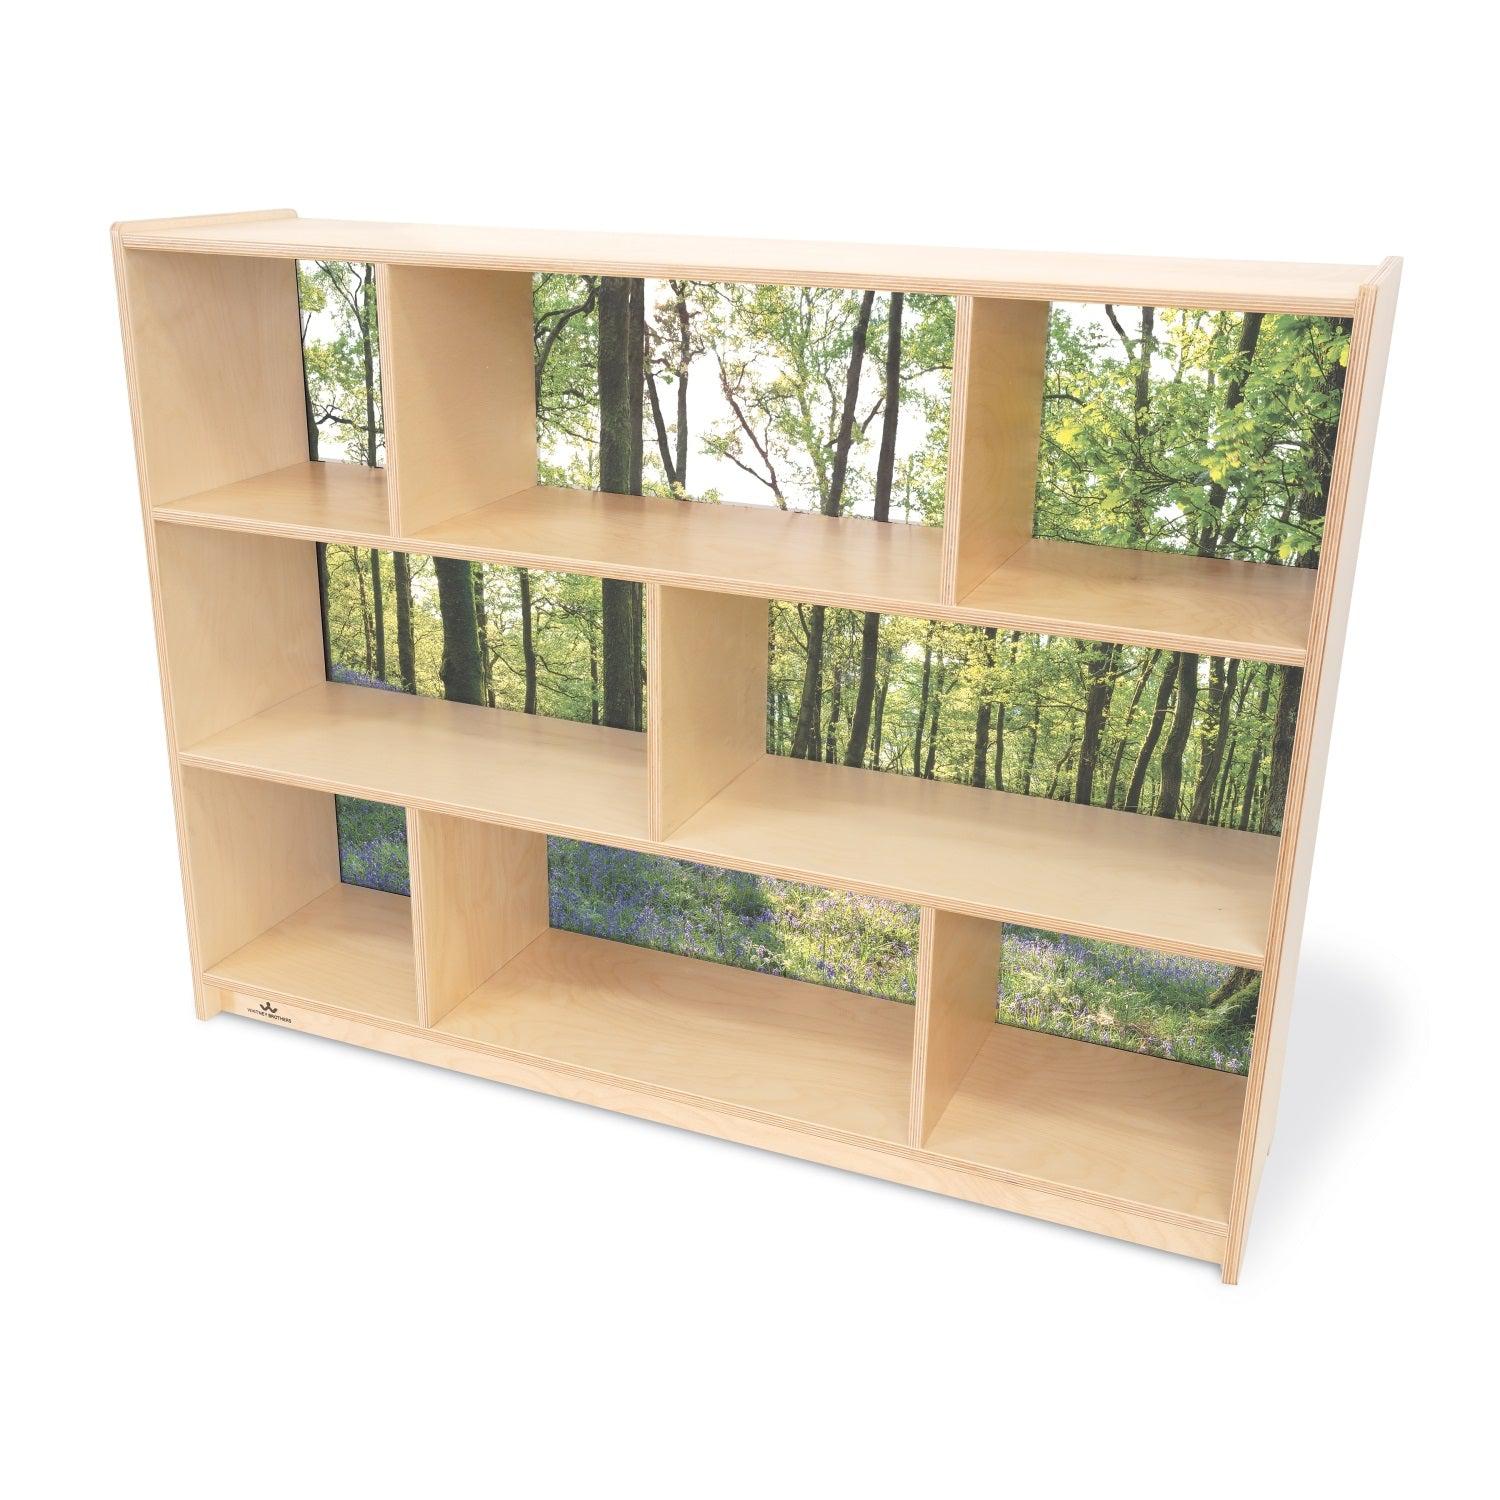 Nature View Serenity Cabinet, 36" H